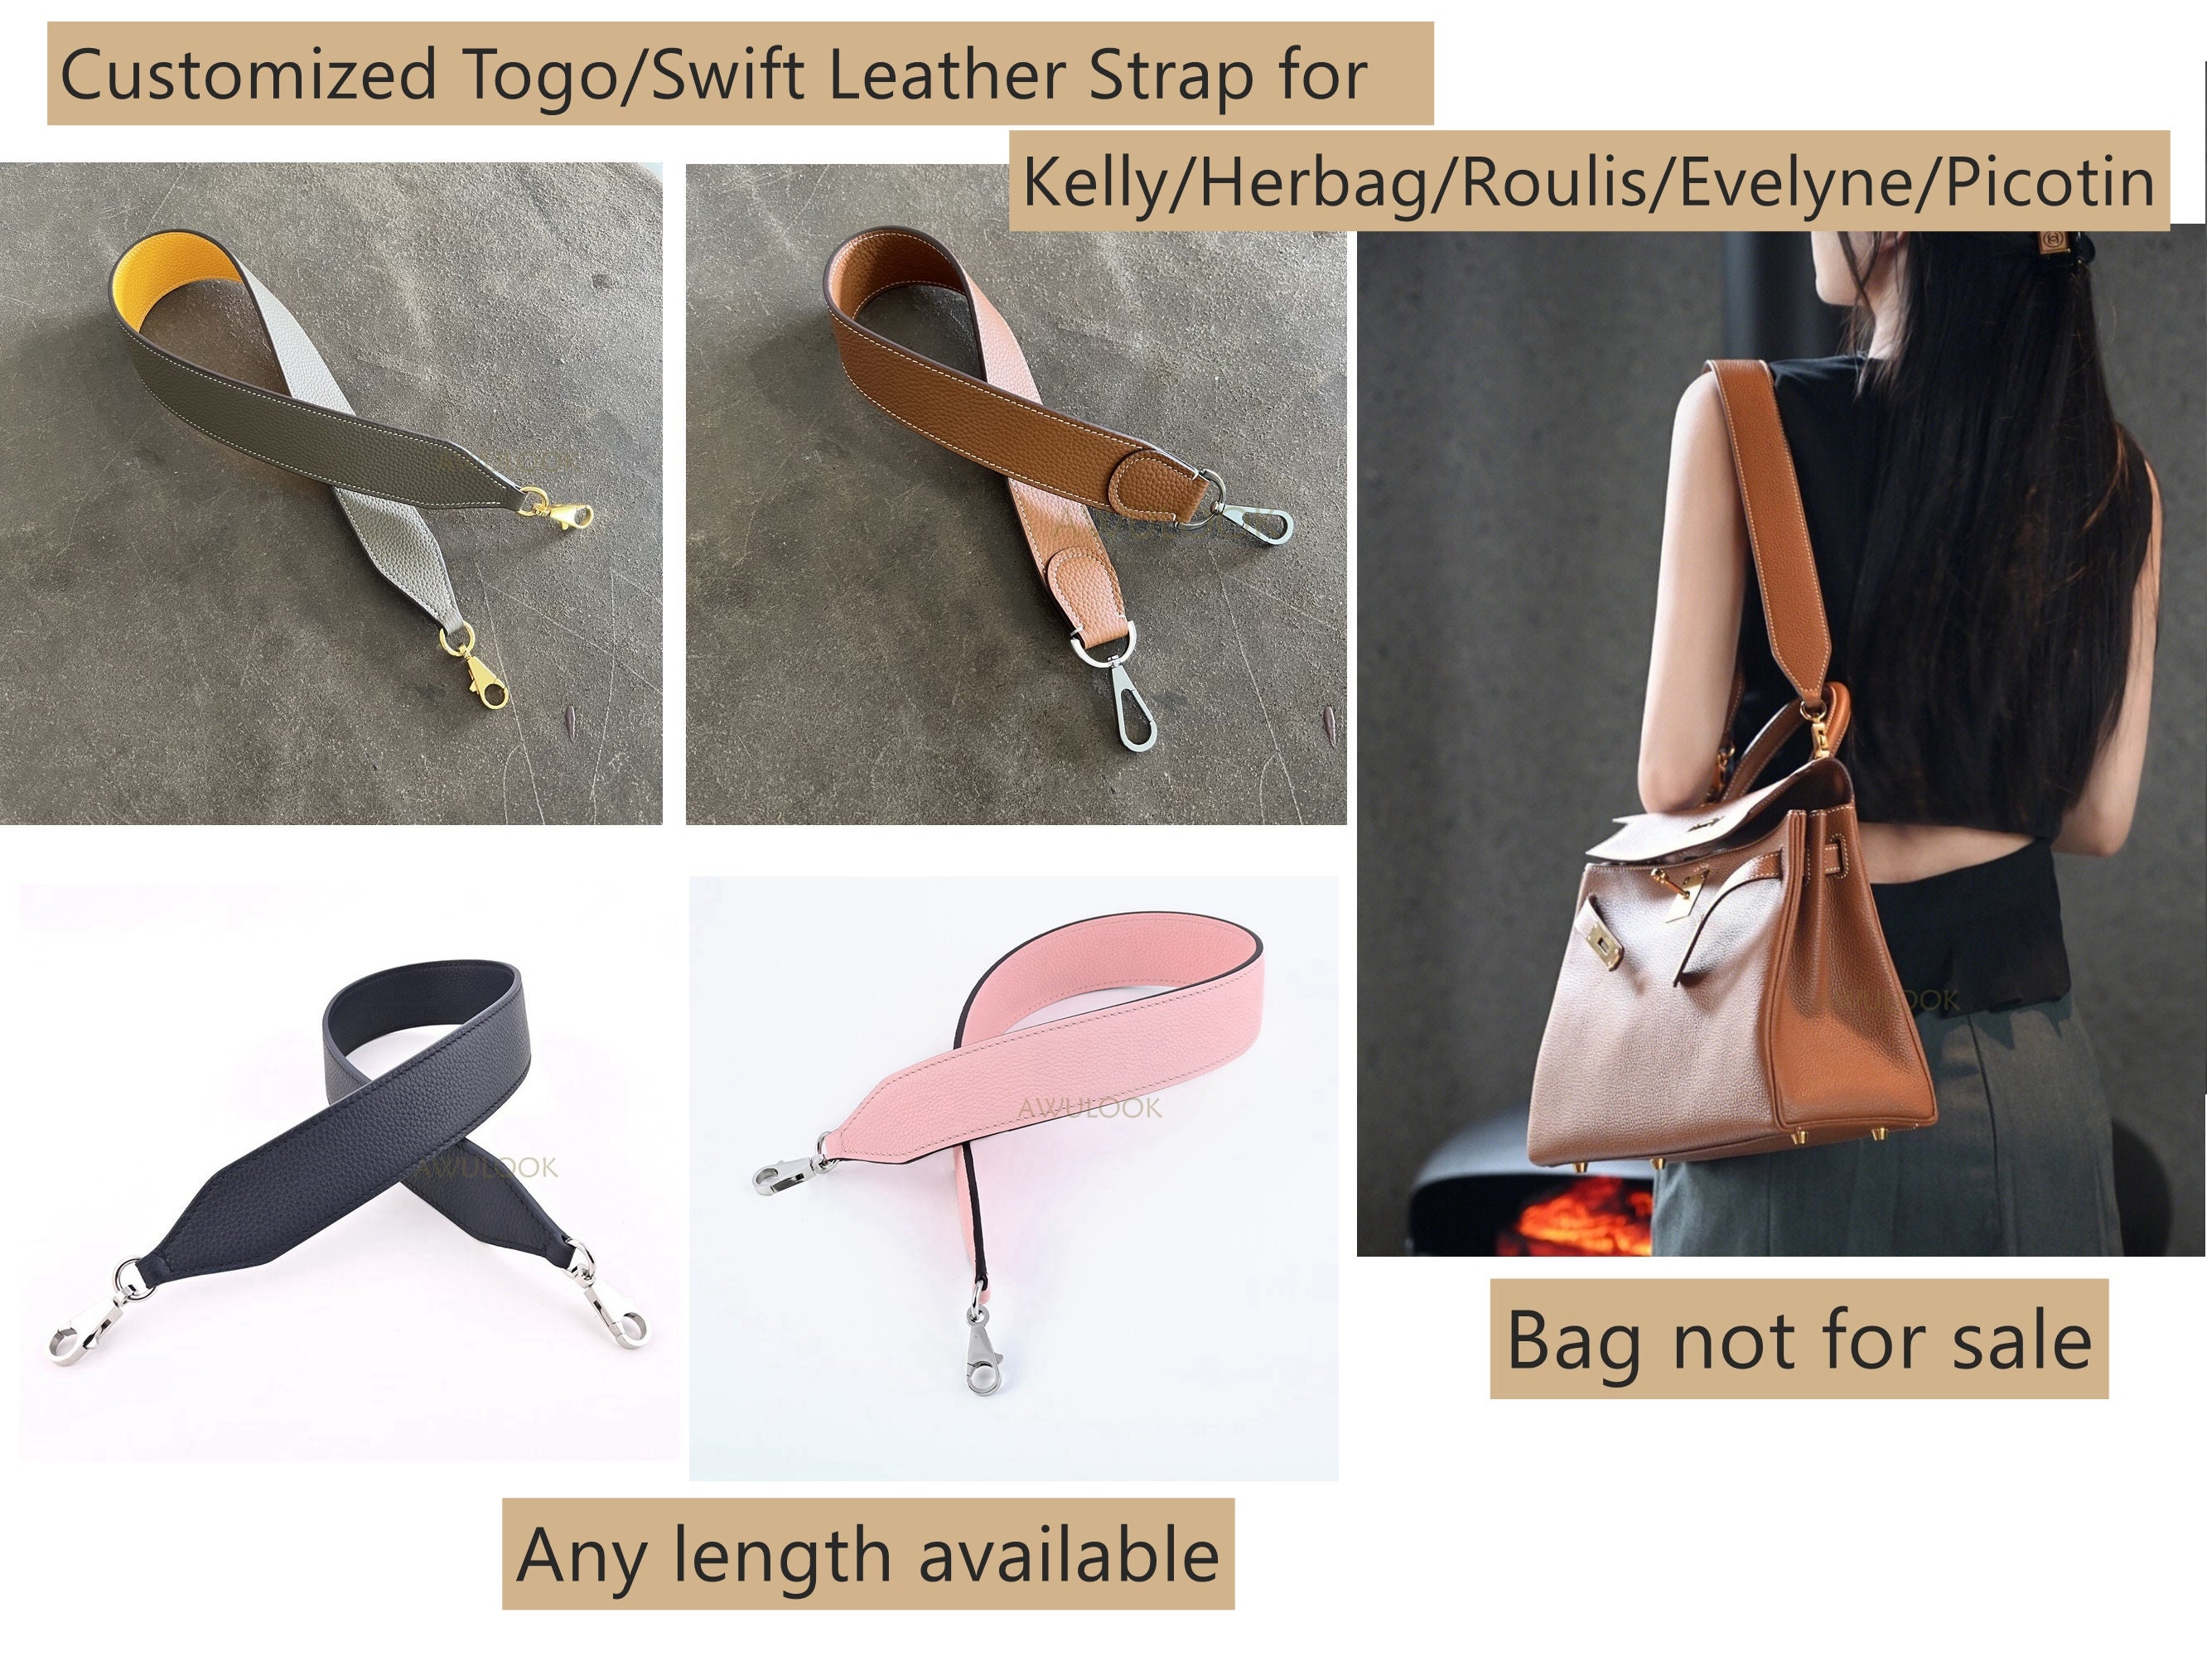 Customized Togo/Swift Leather Shoulder Bag Strap/Crossbody Straps for Kelly/Evelyne/Roulis/Herbag/Picotin/other Bags